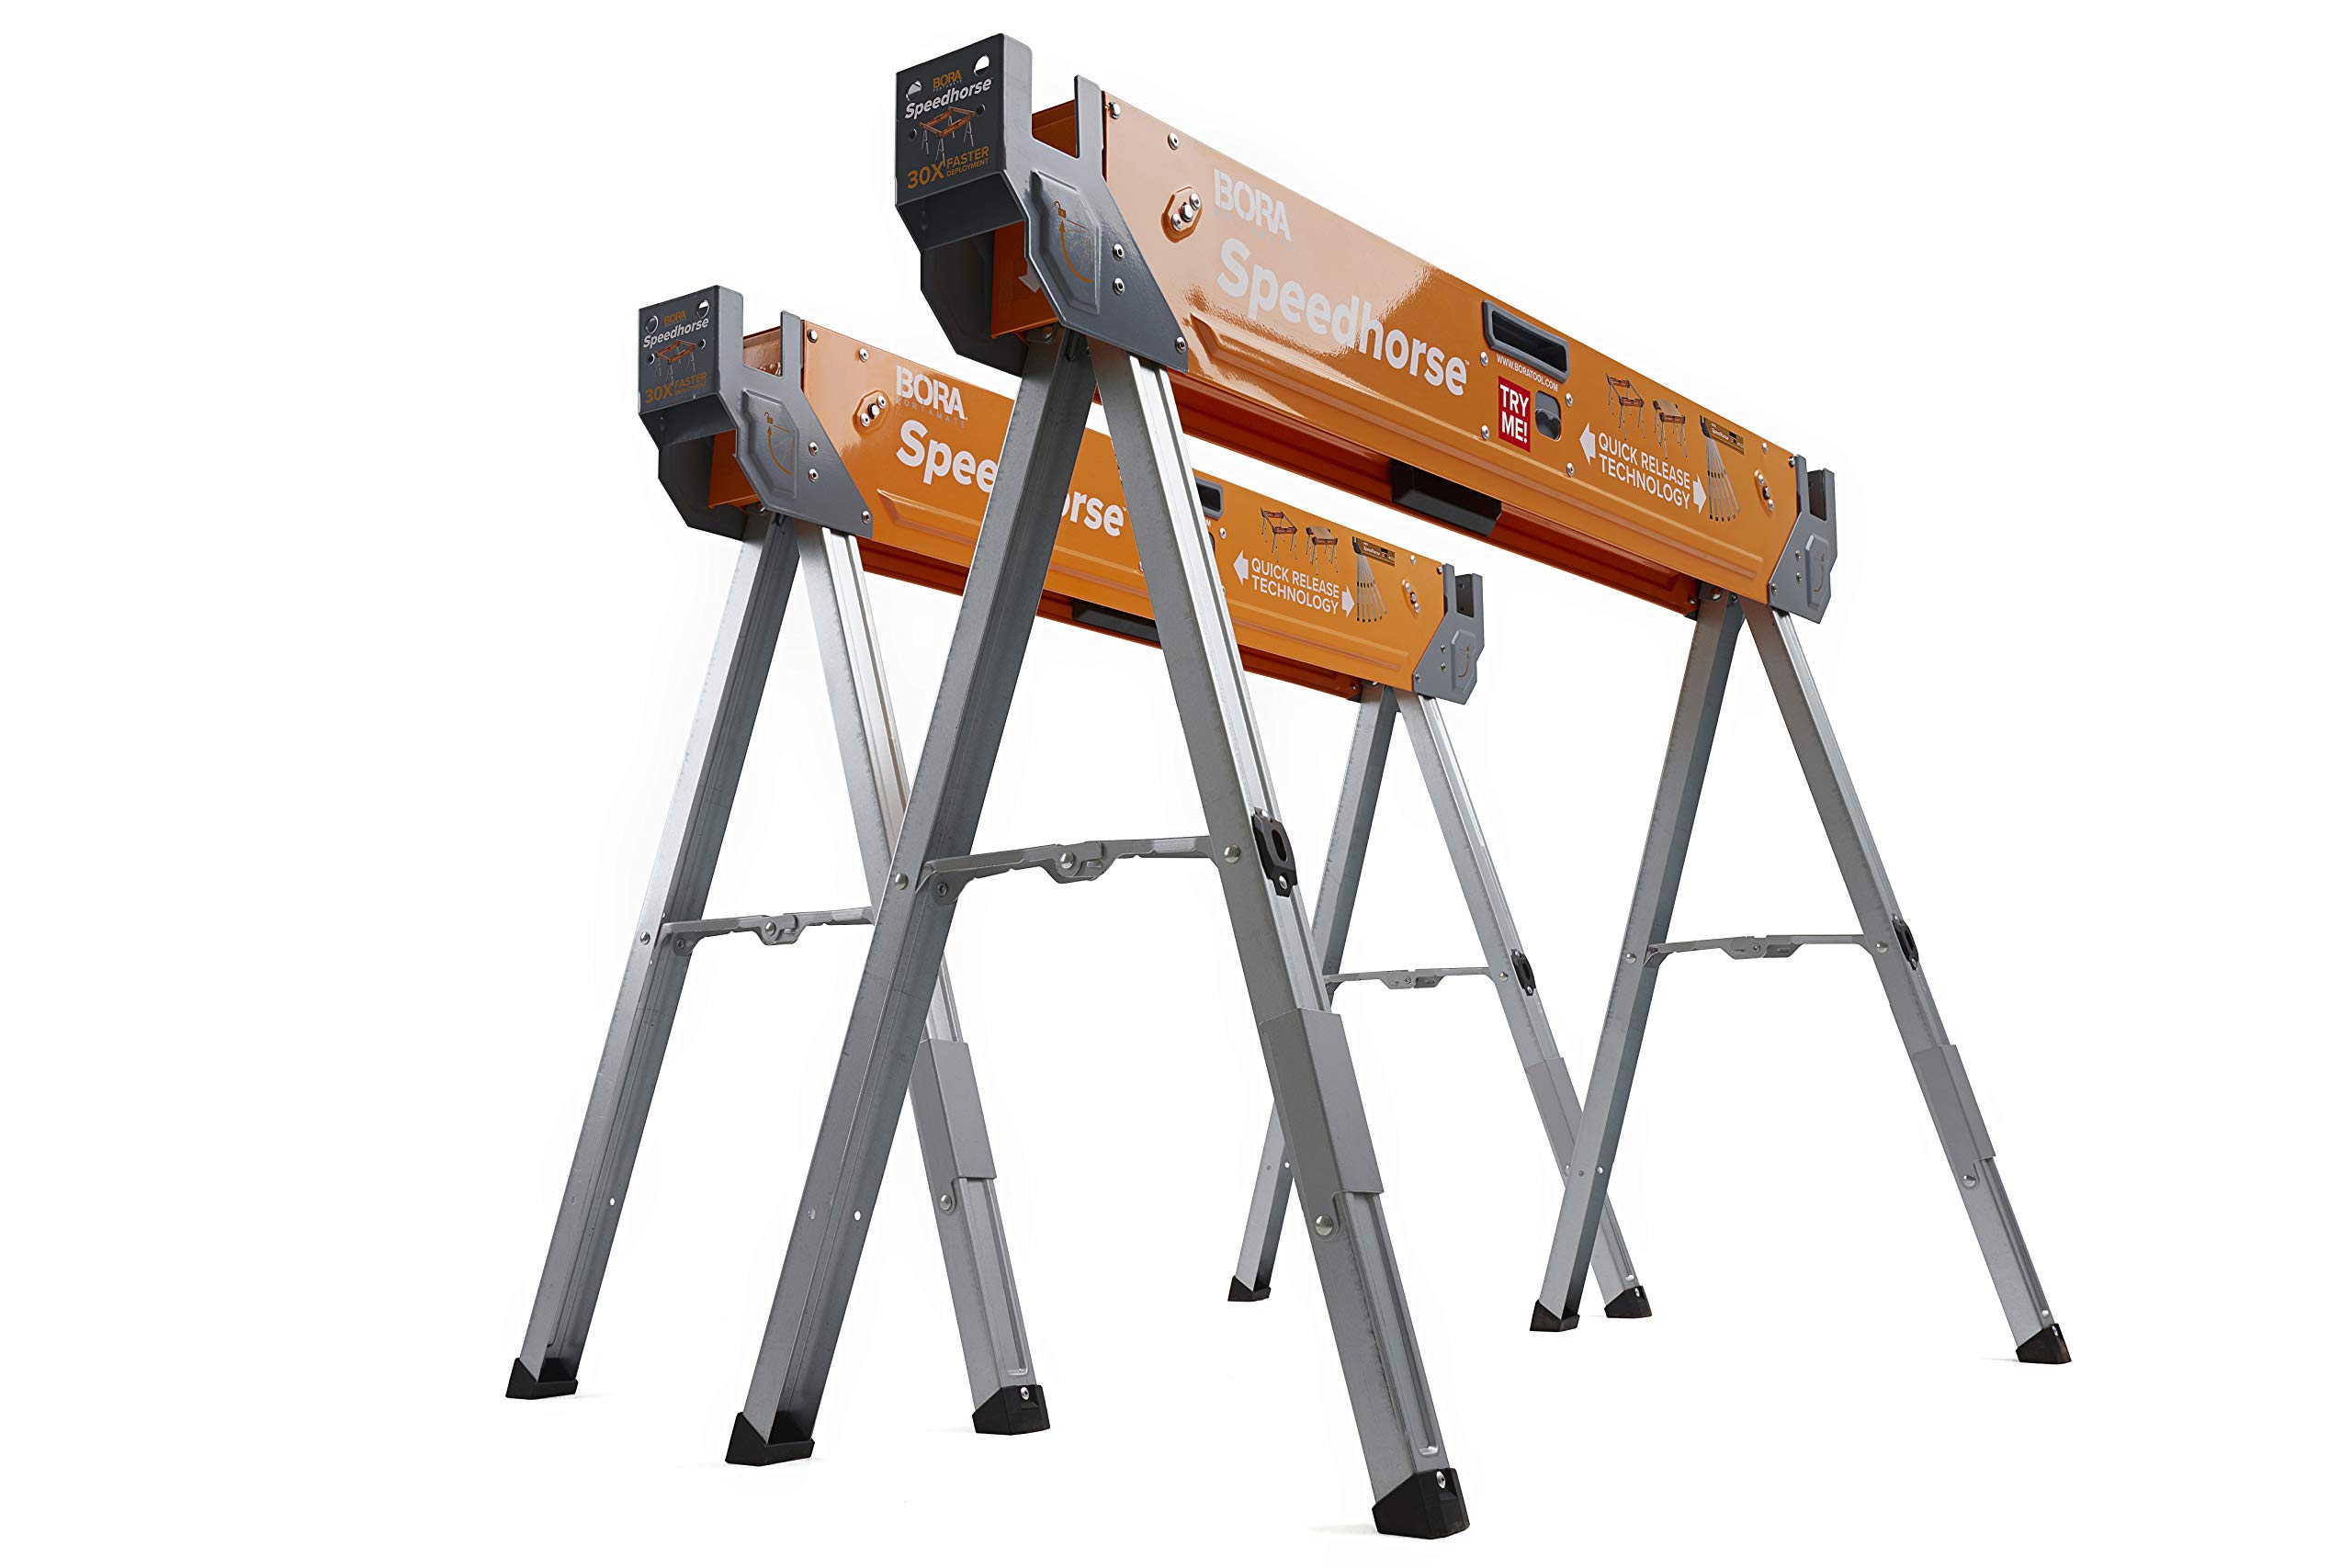 Bora Portamate Speedhorse Sawhorse Pair– Two Pack, Table Stand with Folding Legs, Metal Top for 2x4, Heavy Duty Pro Bench Saw Horse for Woodworking, Carpenters, Contractors, PM-4500T,Orange